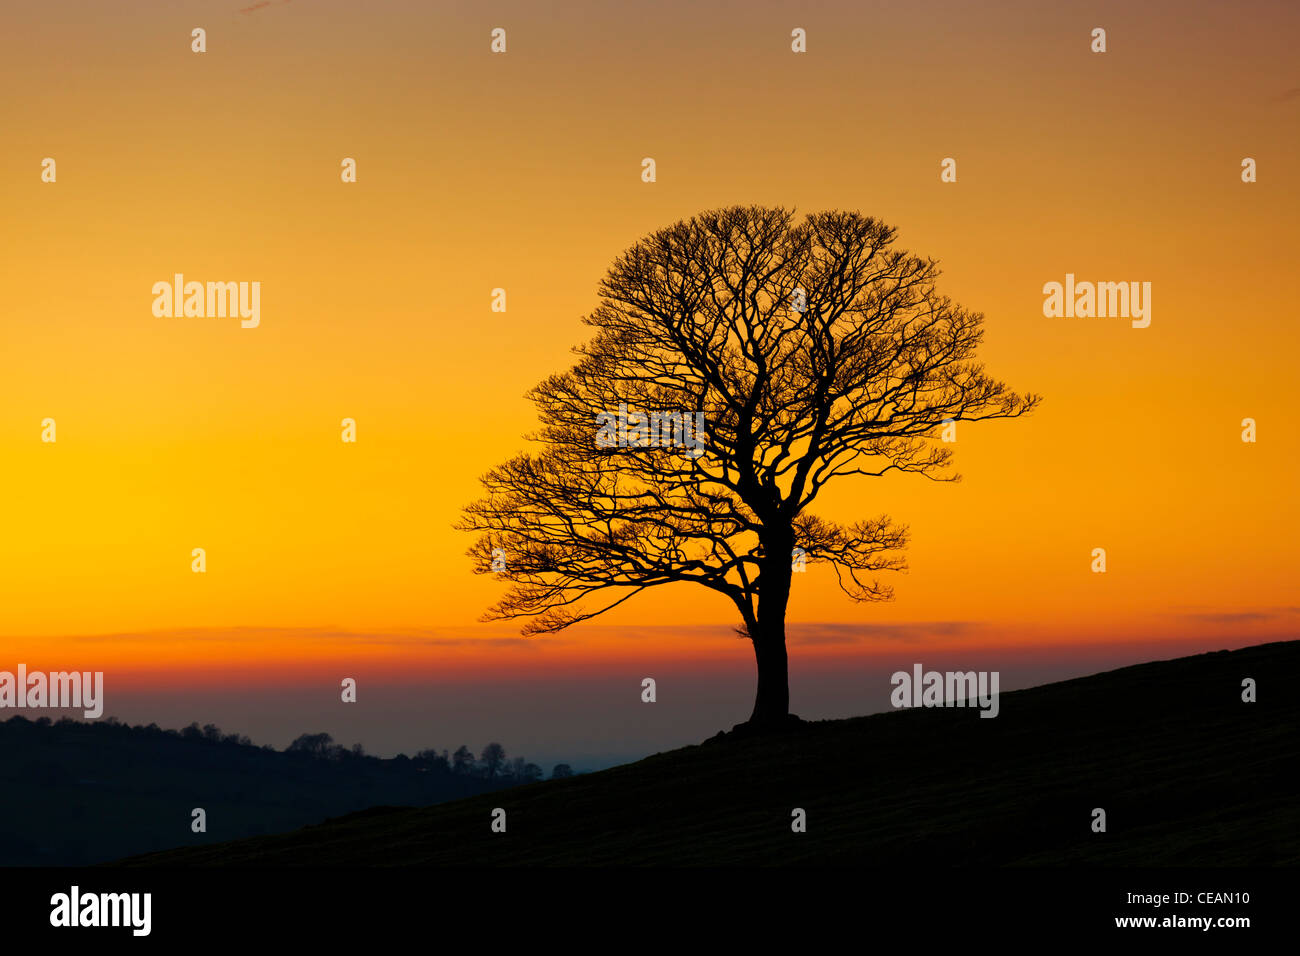 Tree on a hill - Winter tree empty of leaves on a winters day at sunset in the Roaches near Leek, Staffordshire, England, UK GB Europe One Tree Stock Photo